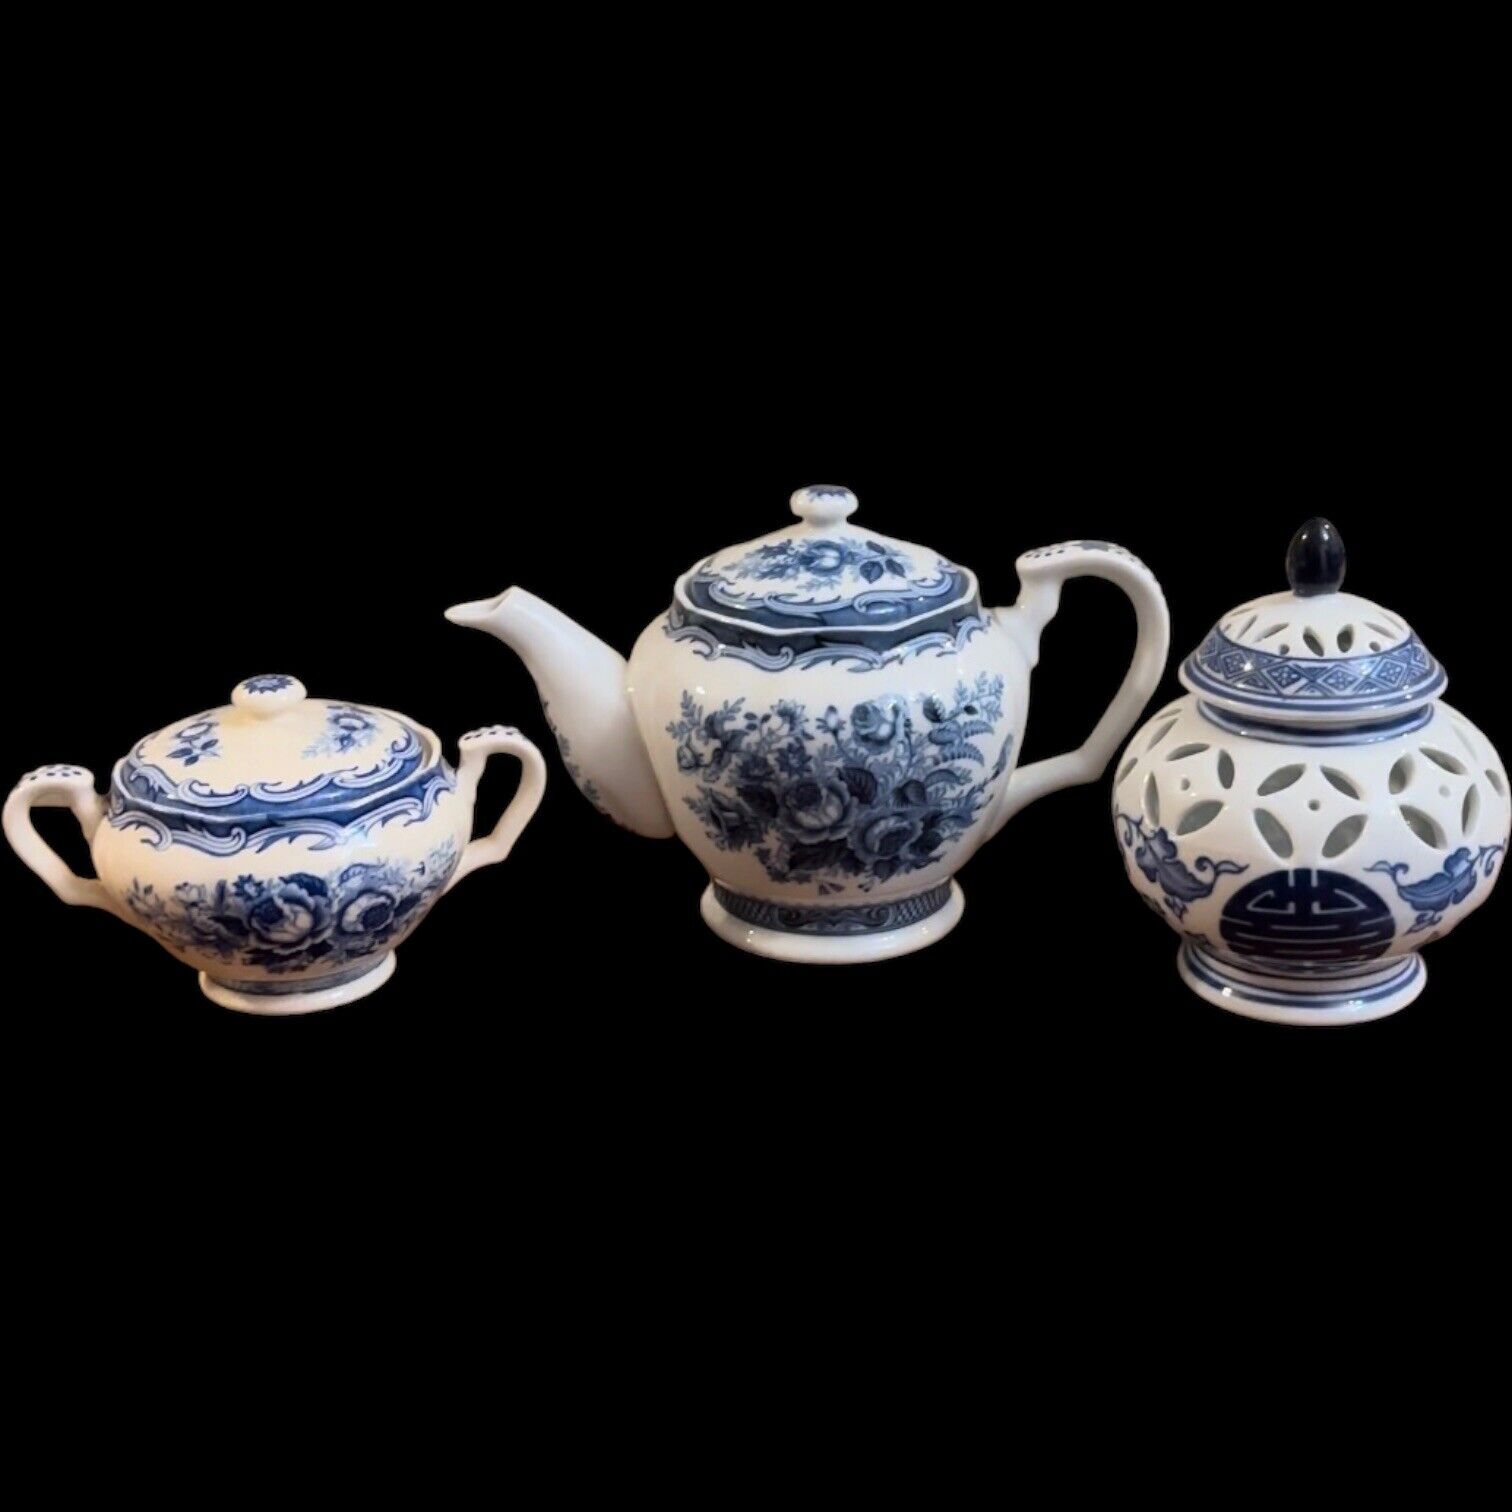 Vintage Lot of 3 Blue and White Reticulated Gingar Jar and Teapots Chinas